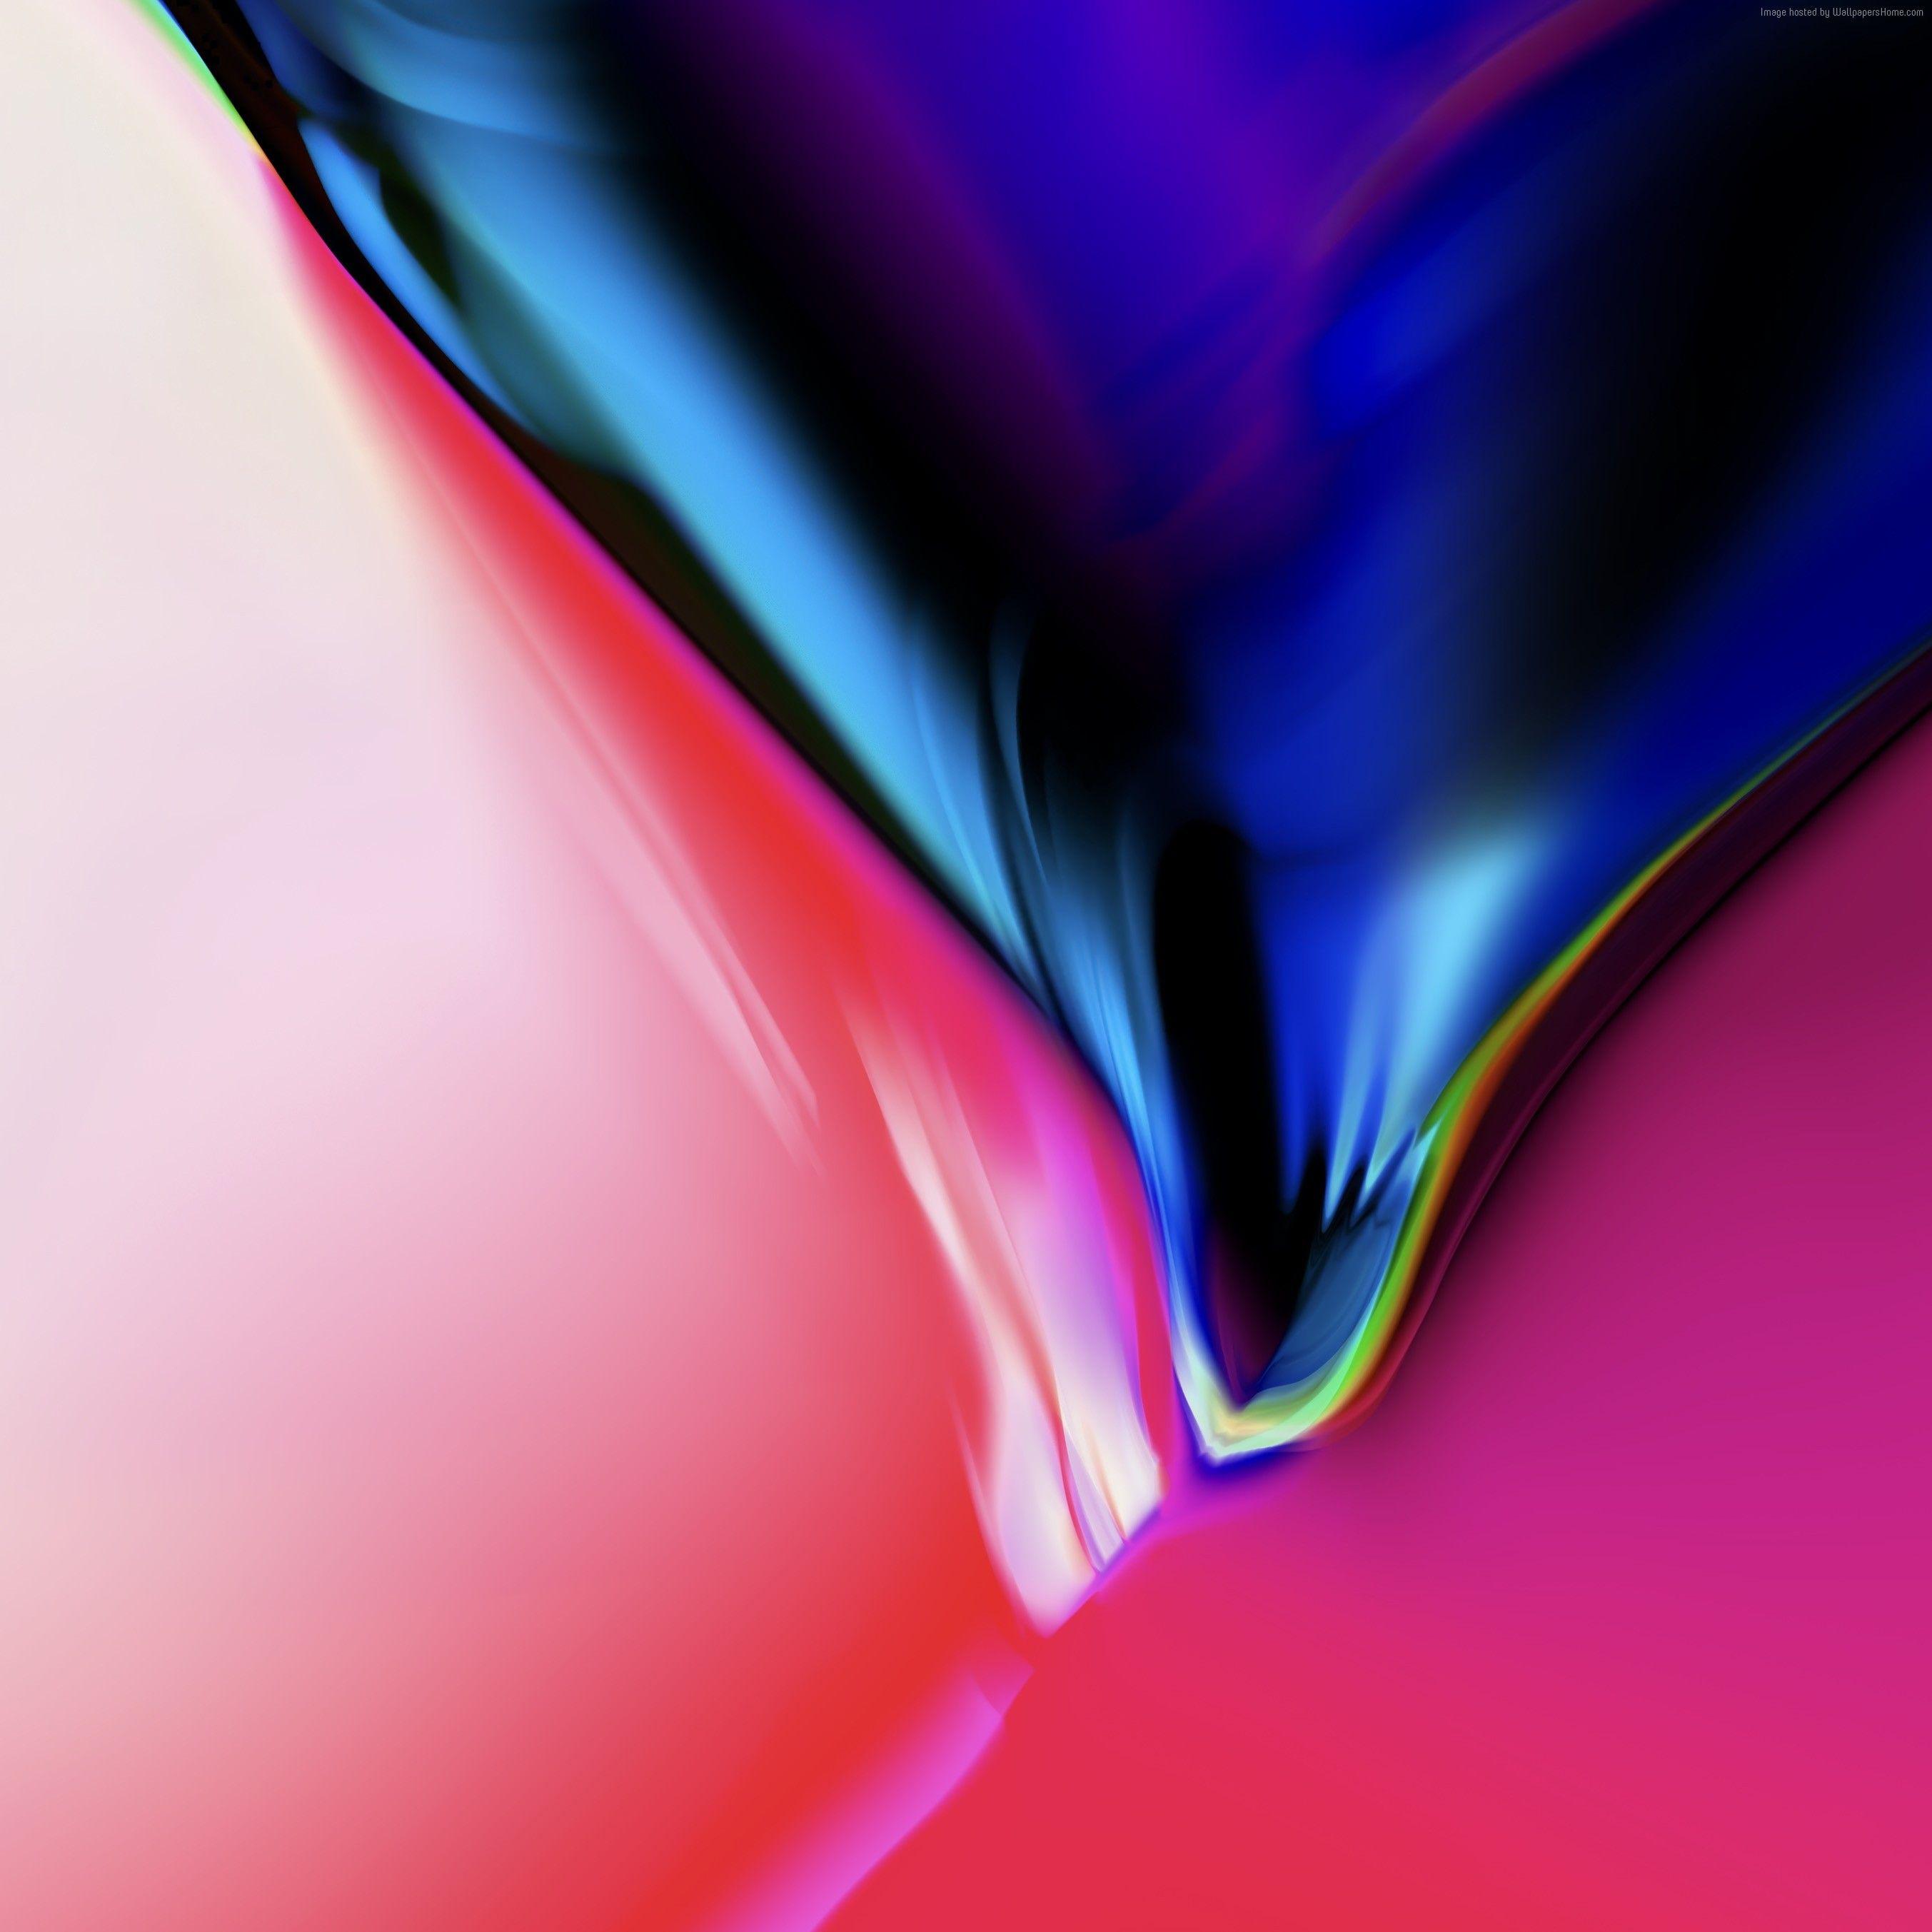 Wallpapers iPhone X wallpaper, iPhone 8, iOS 11, colorful, HD, OS